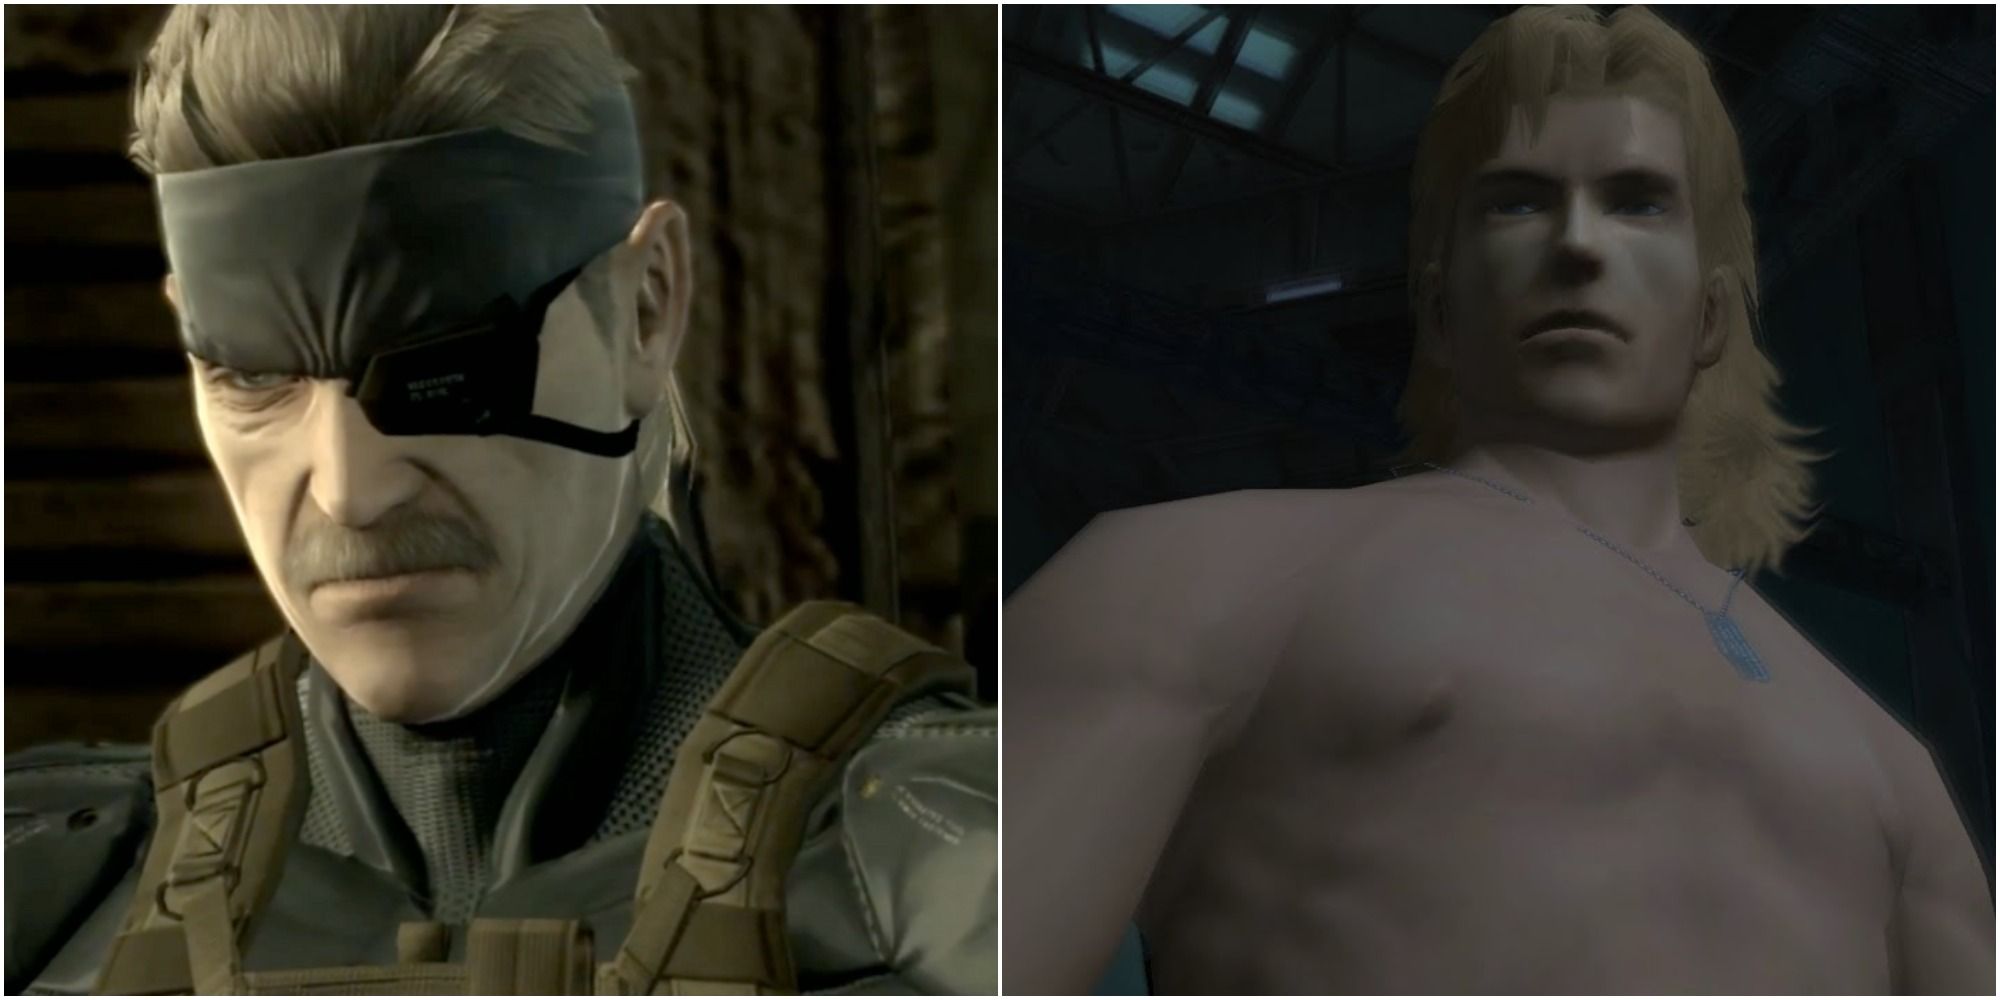 Metal Gear Solid Liquid Snake and Solid Snake's sibling rivalry